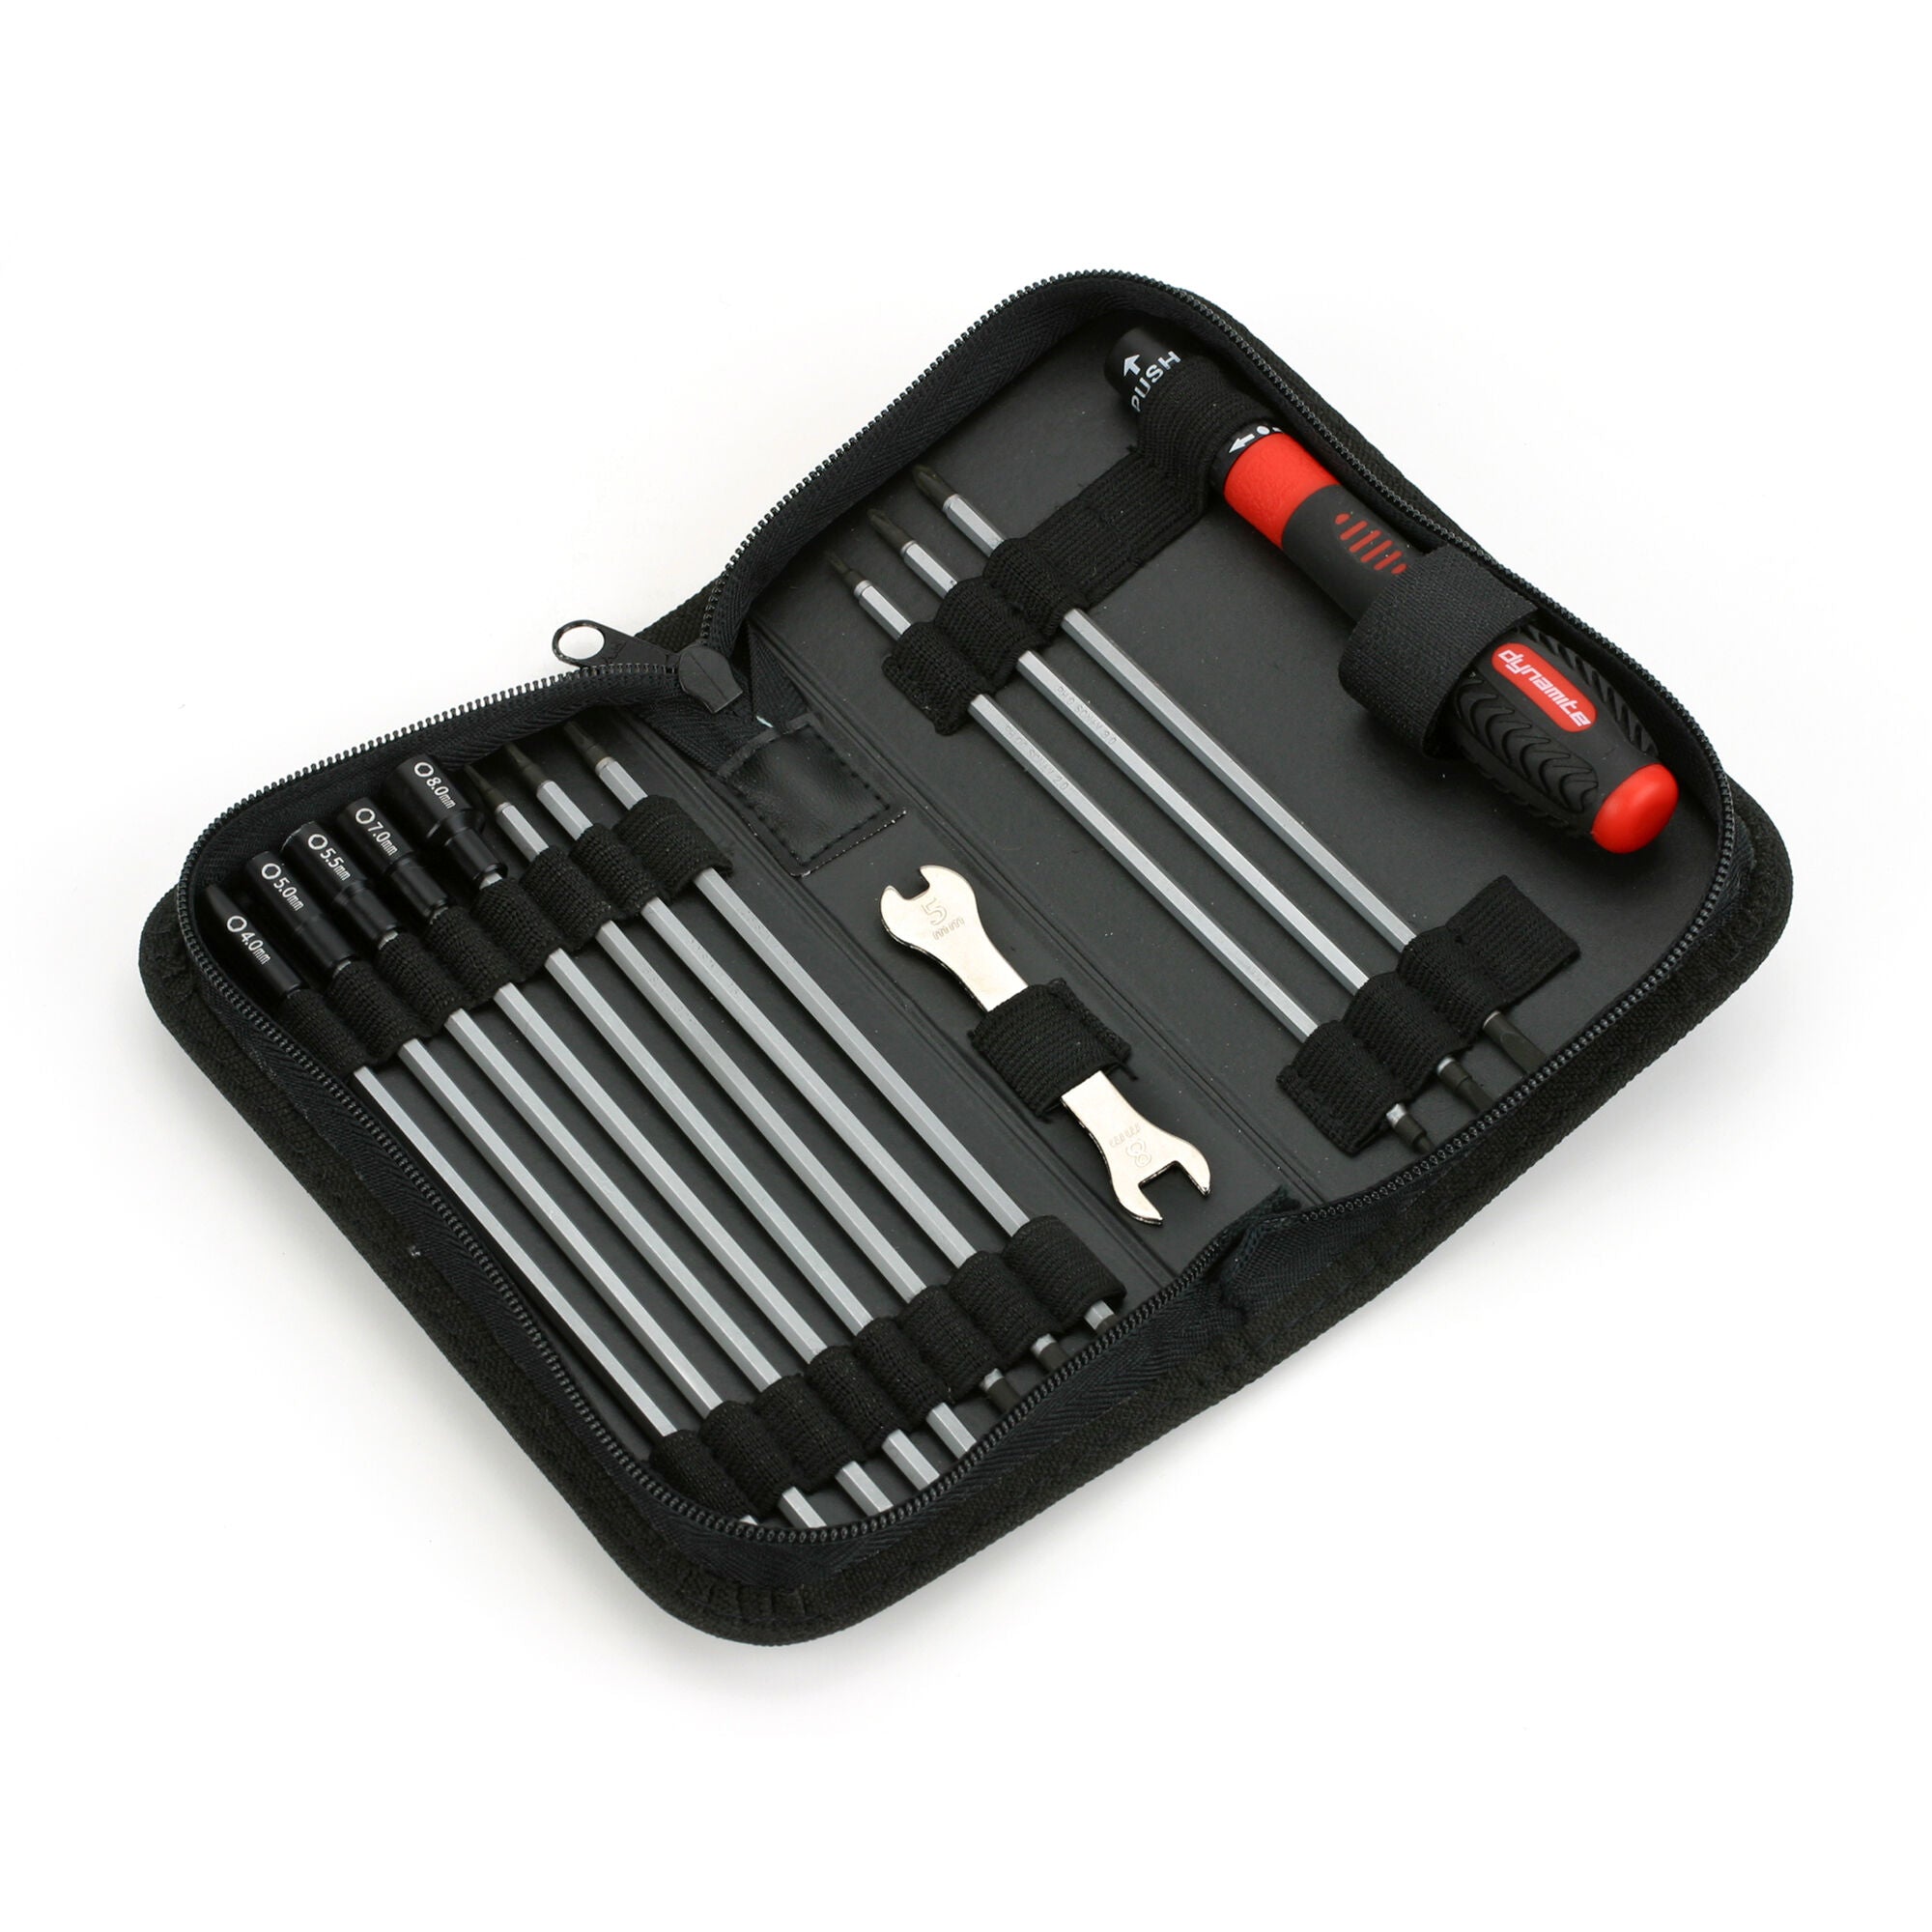 Dynamite DYN2833 Startup Tool Set for Traxxas Vehicles